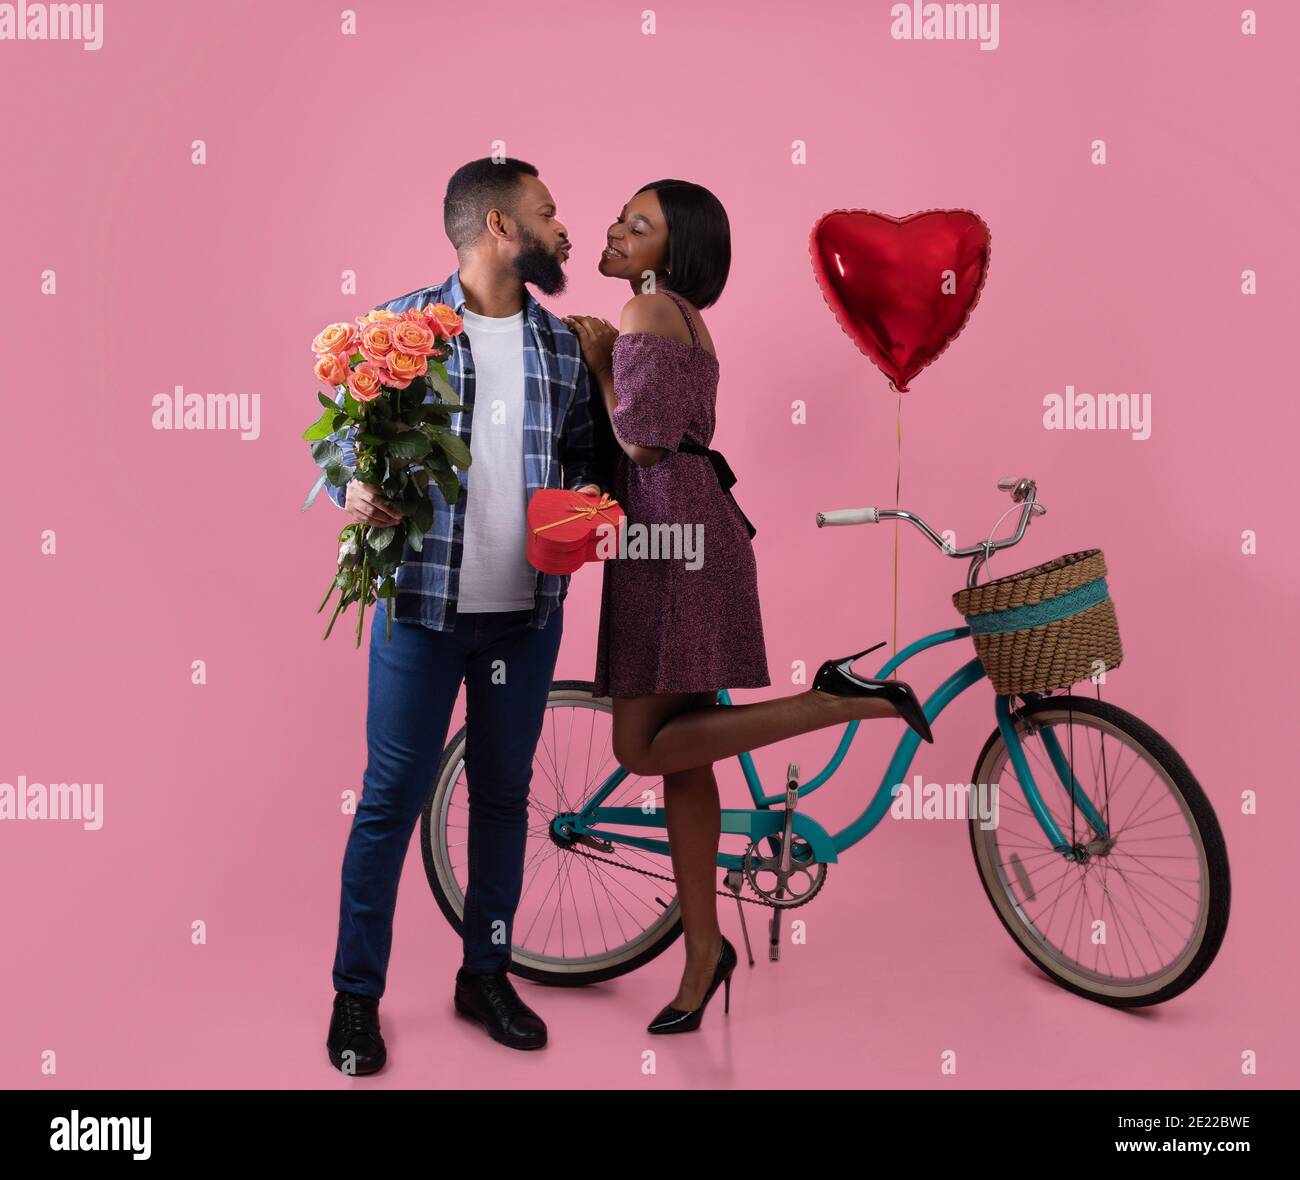 Beautiful Couple Kissing On Bike High Resolution Stock Photography and  Images - Alamy